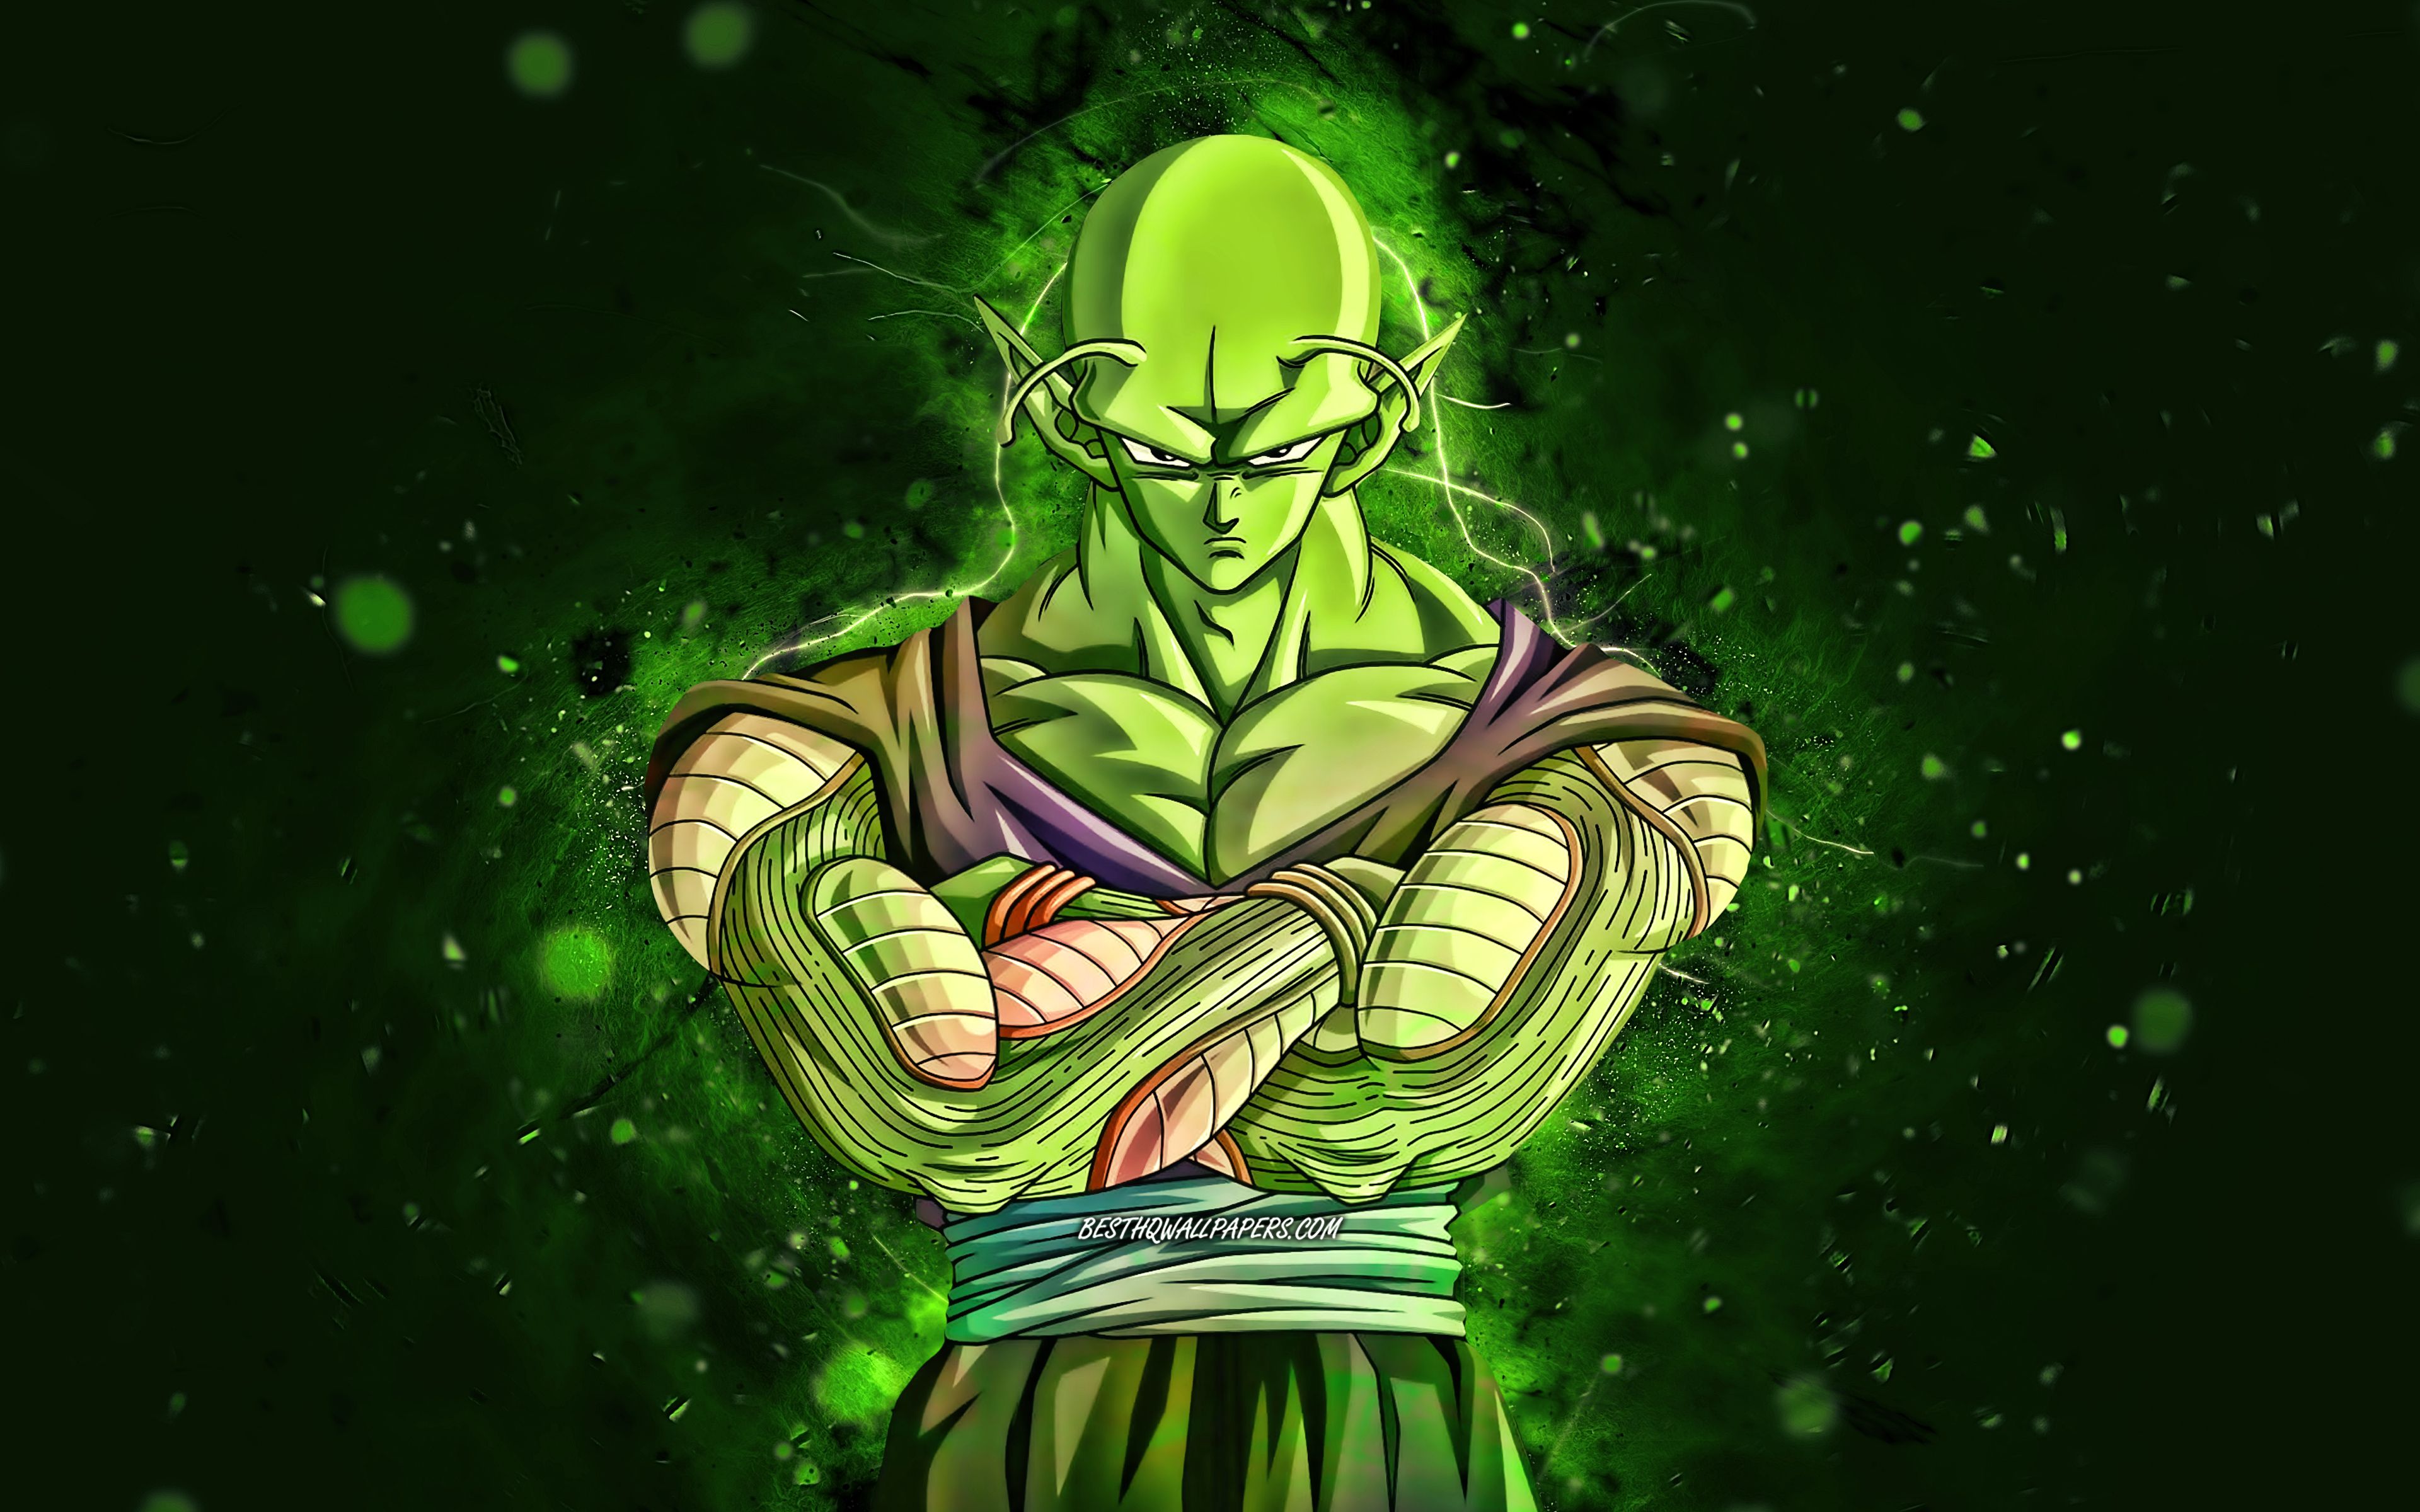 Download wallpaper Piccolo, 4k, green neon lights, Dragon Ball, warrior, Dragon Ball Super, DBS, Piccolo DBS, DBS characters for desktop with resolution 3840x2400. High Quality HD picture wallpaper